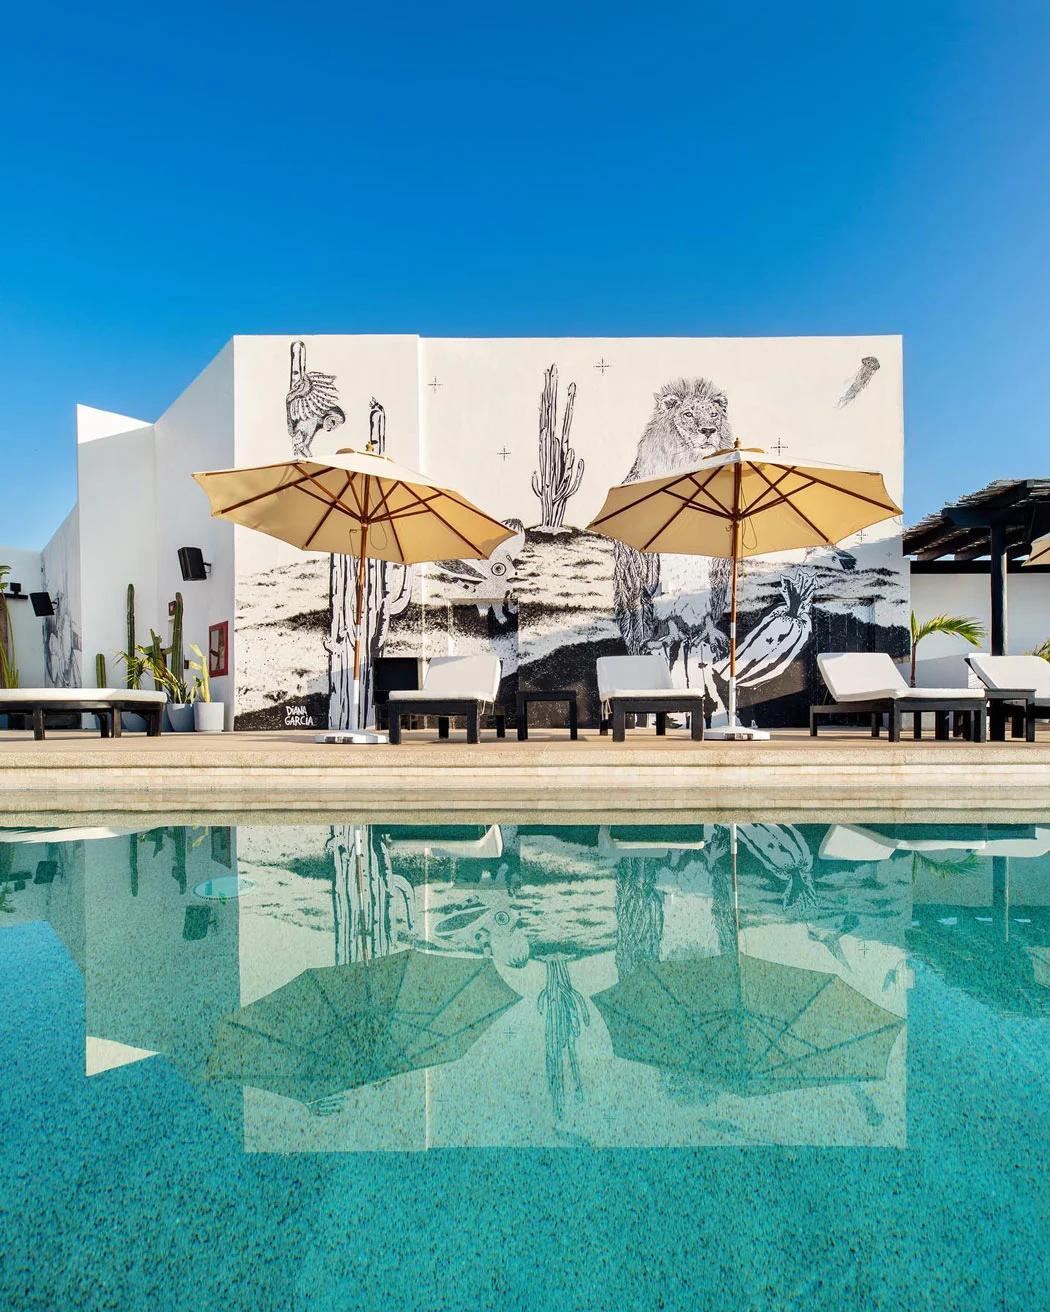 The boutique Hotel El Ganzo has a very cool rooftop pool.